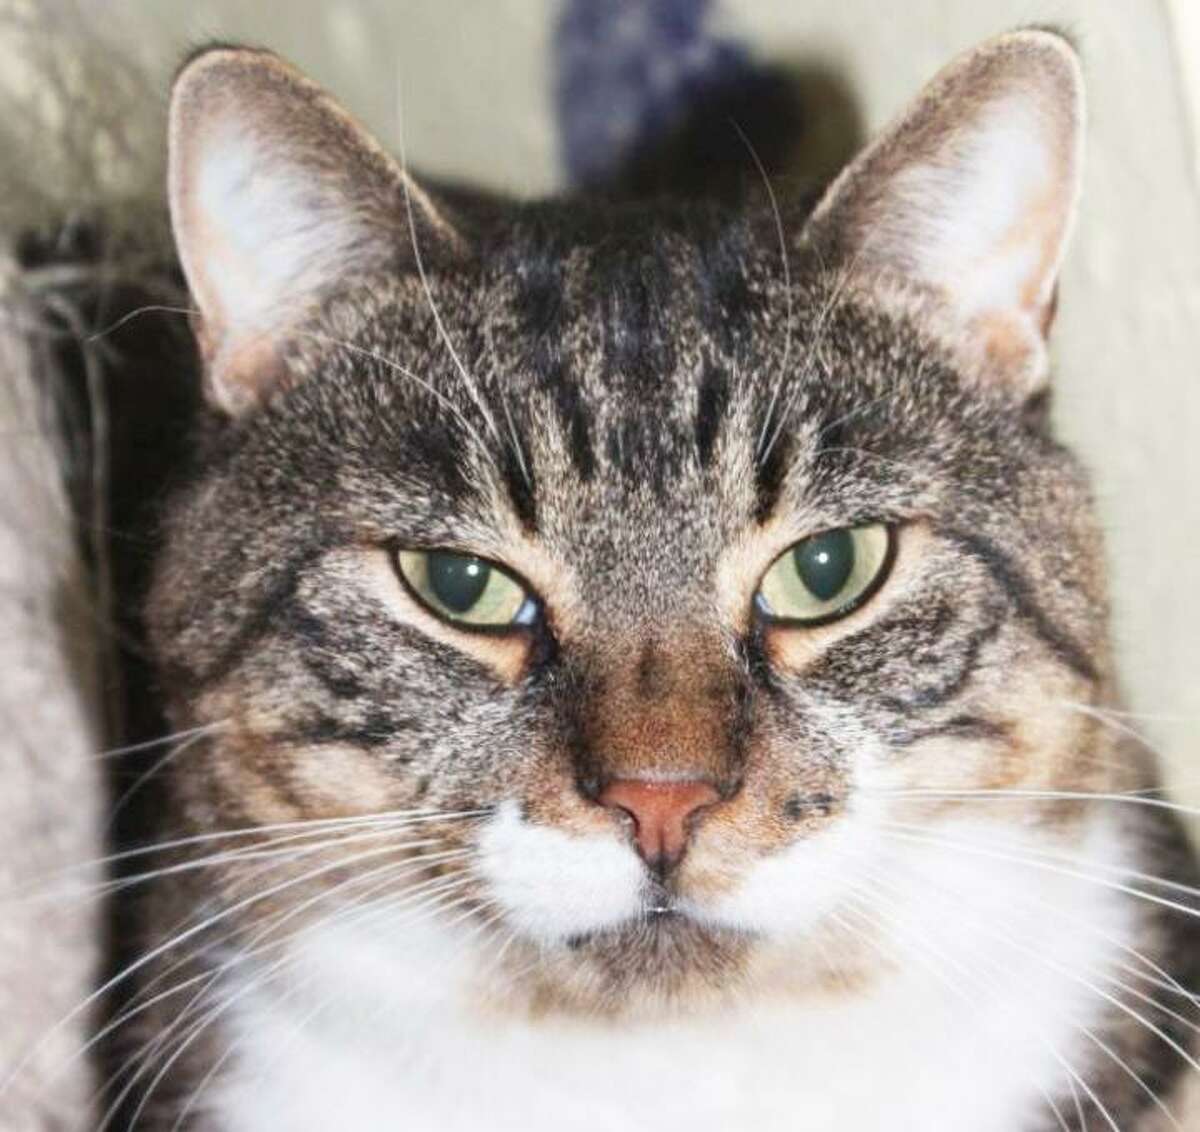 Cat Tales of Middletown has Milo up for adoption.